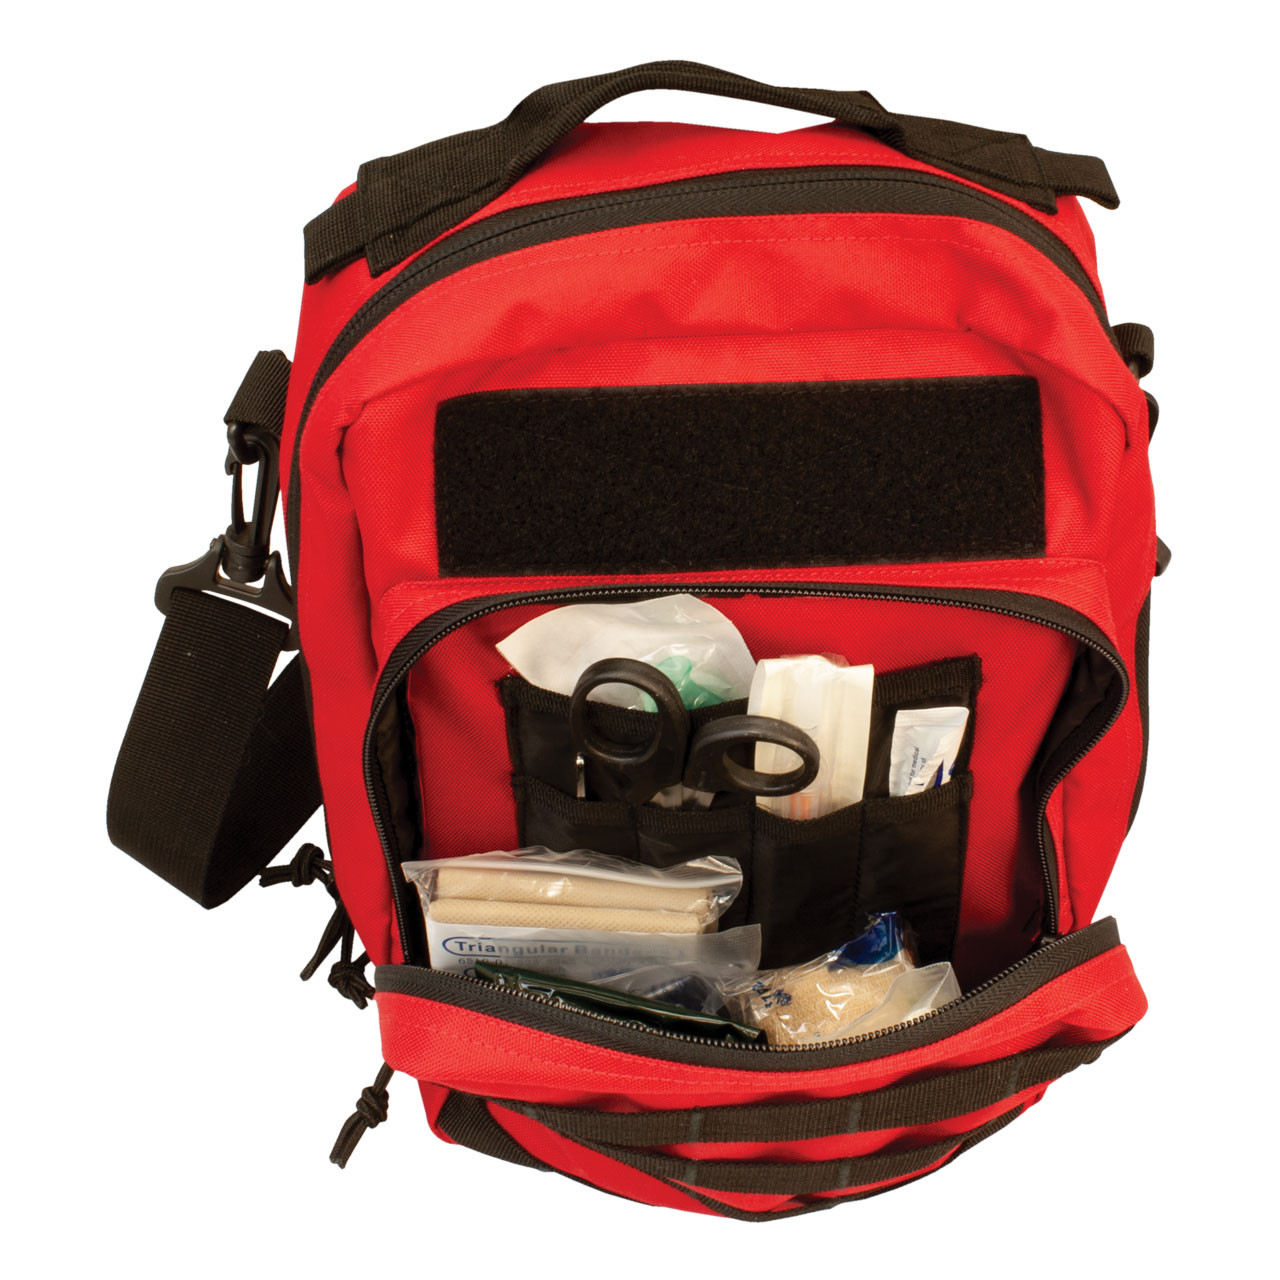 Red Rock Outdoor Gear Blow Out Bag